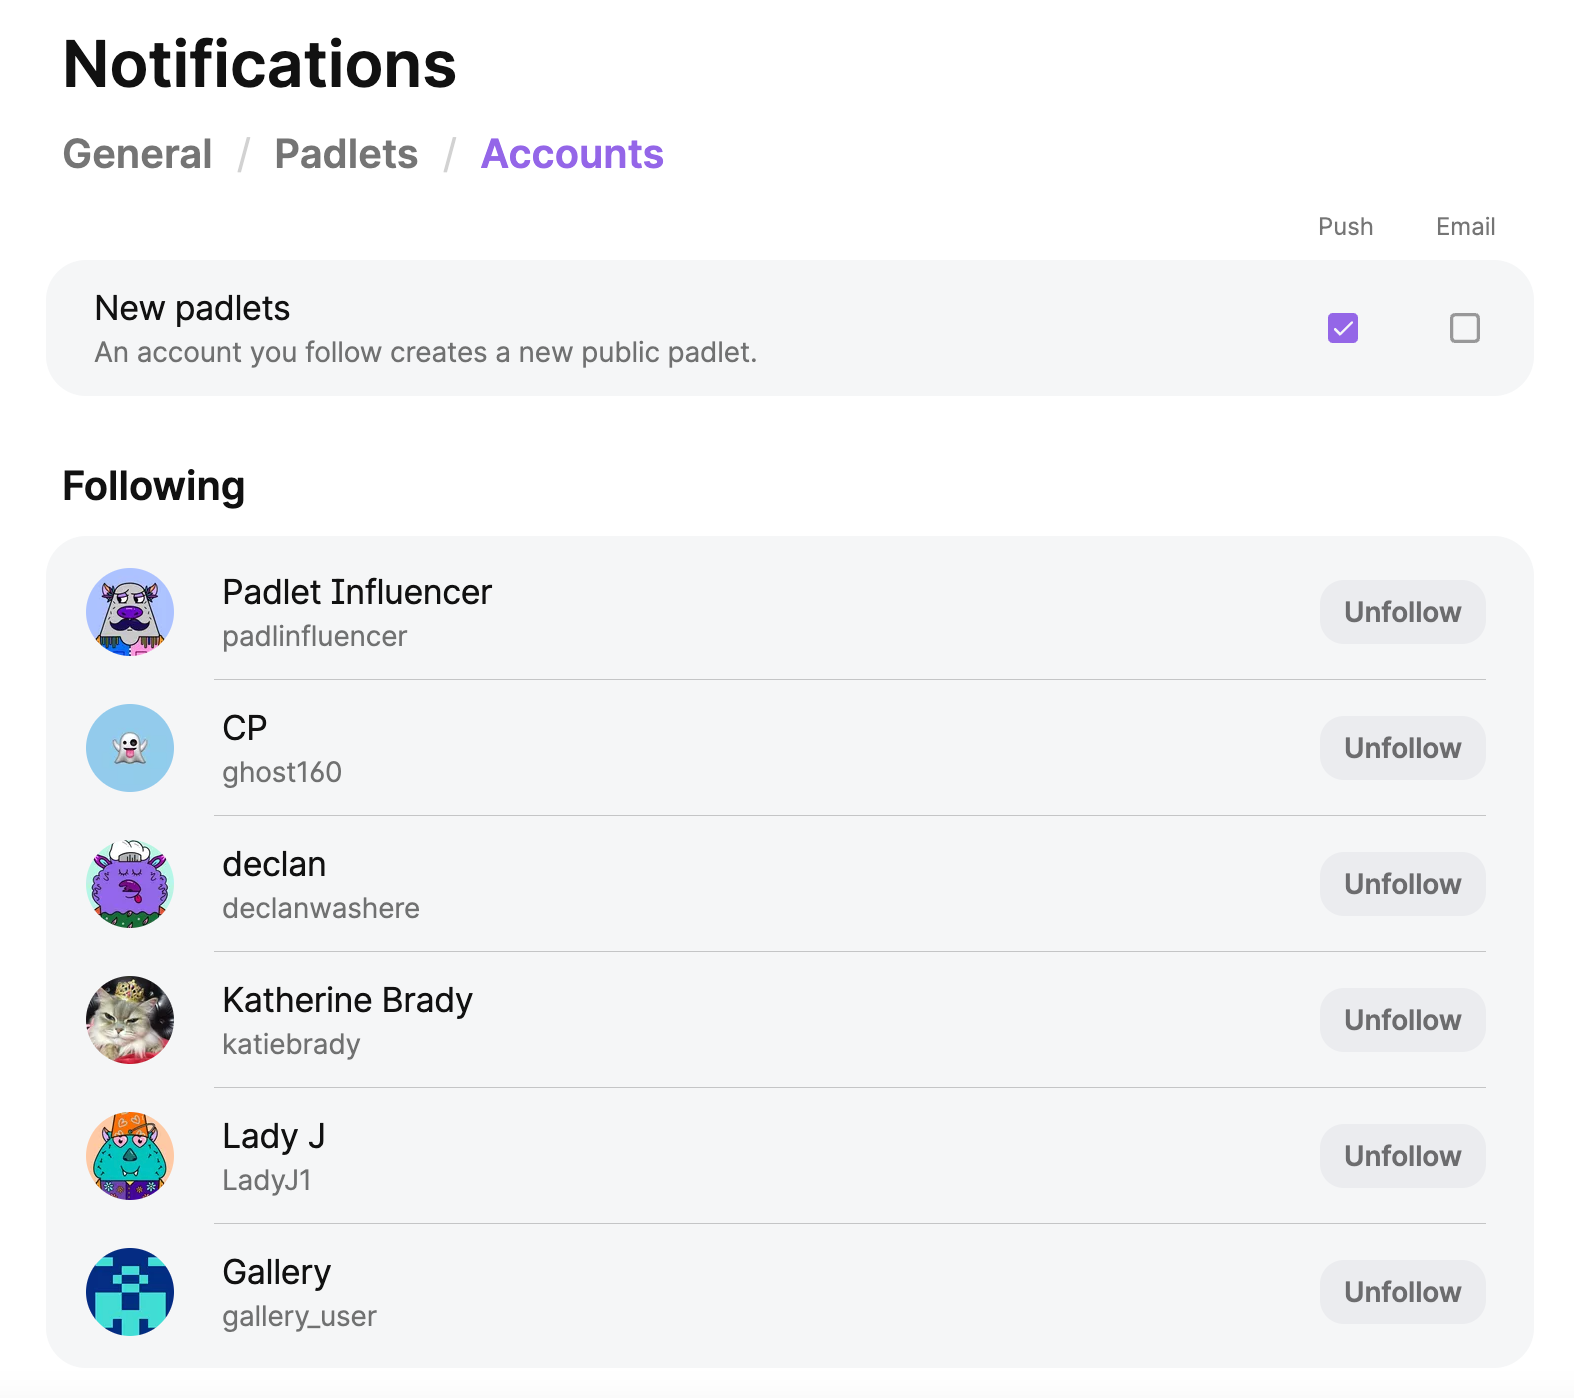 The Notifications page in your settings, showing the default notifications settings for accounts